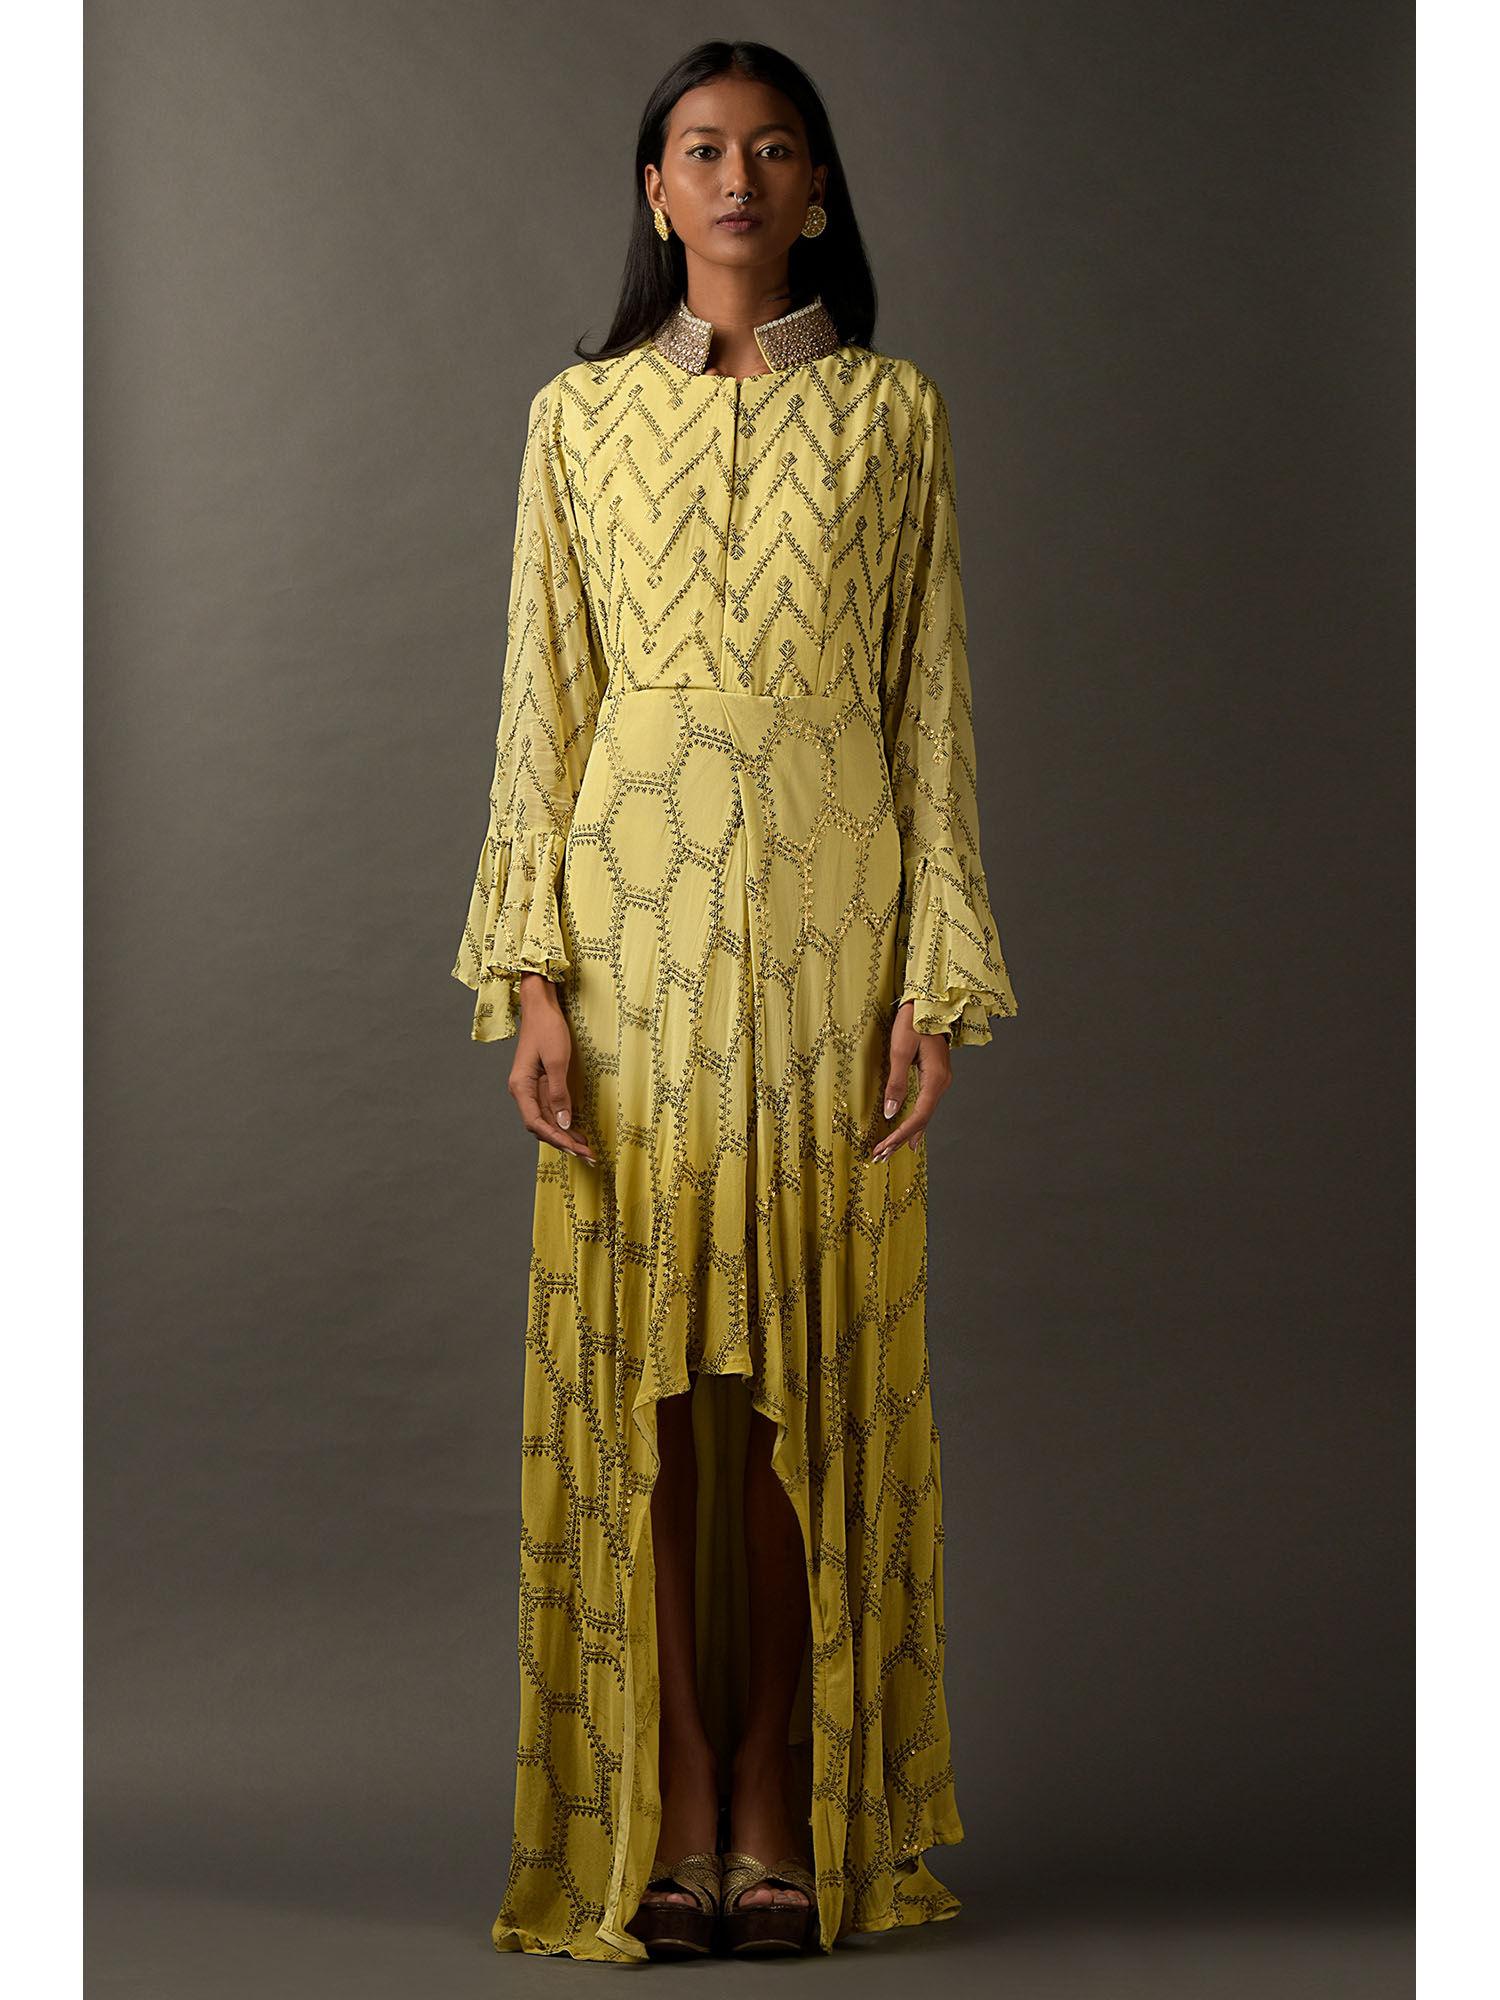 light yellow embroidered dress